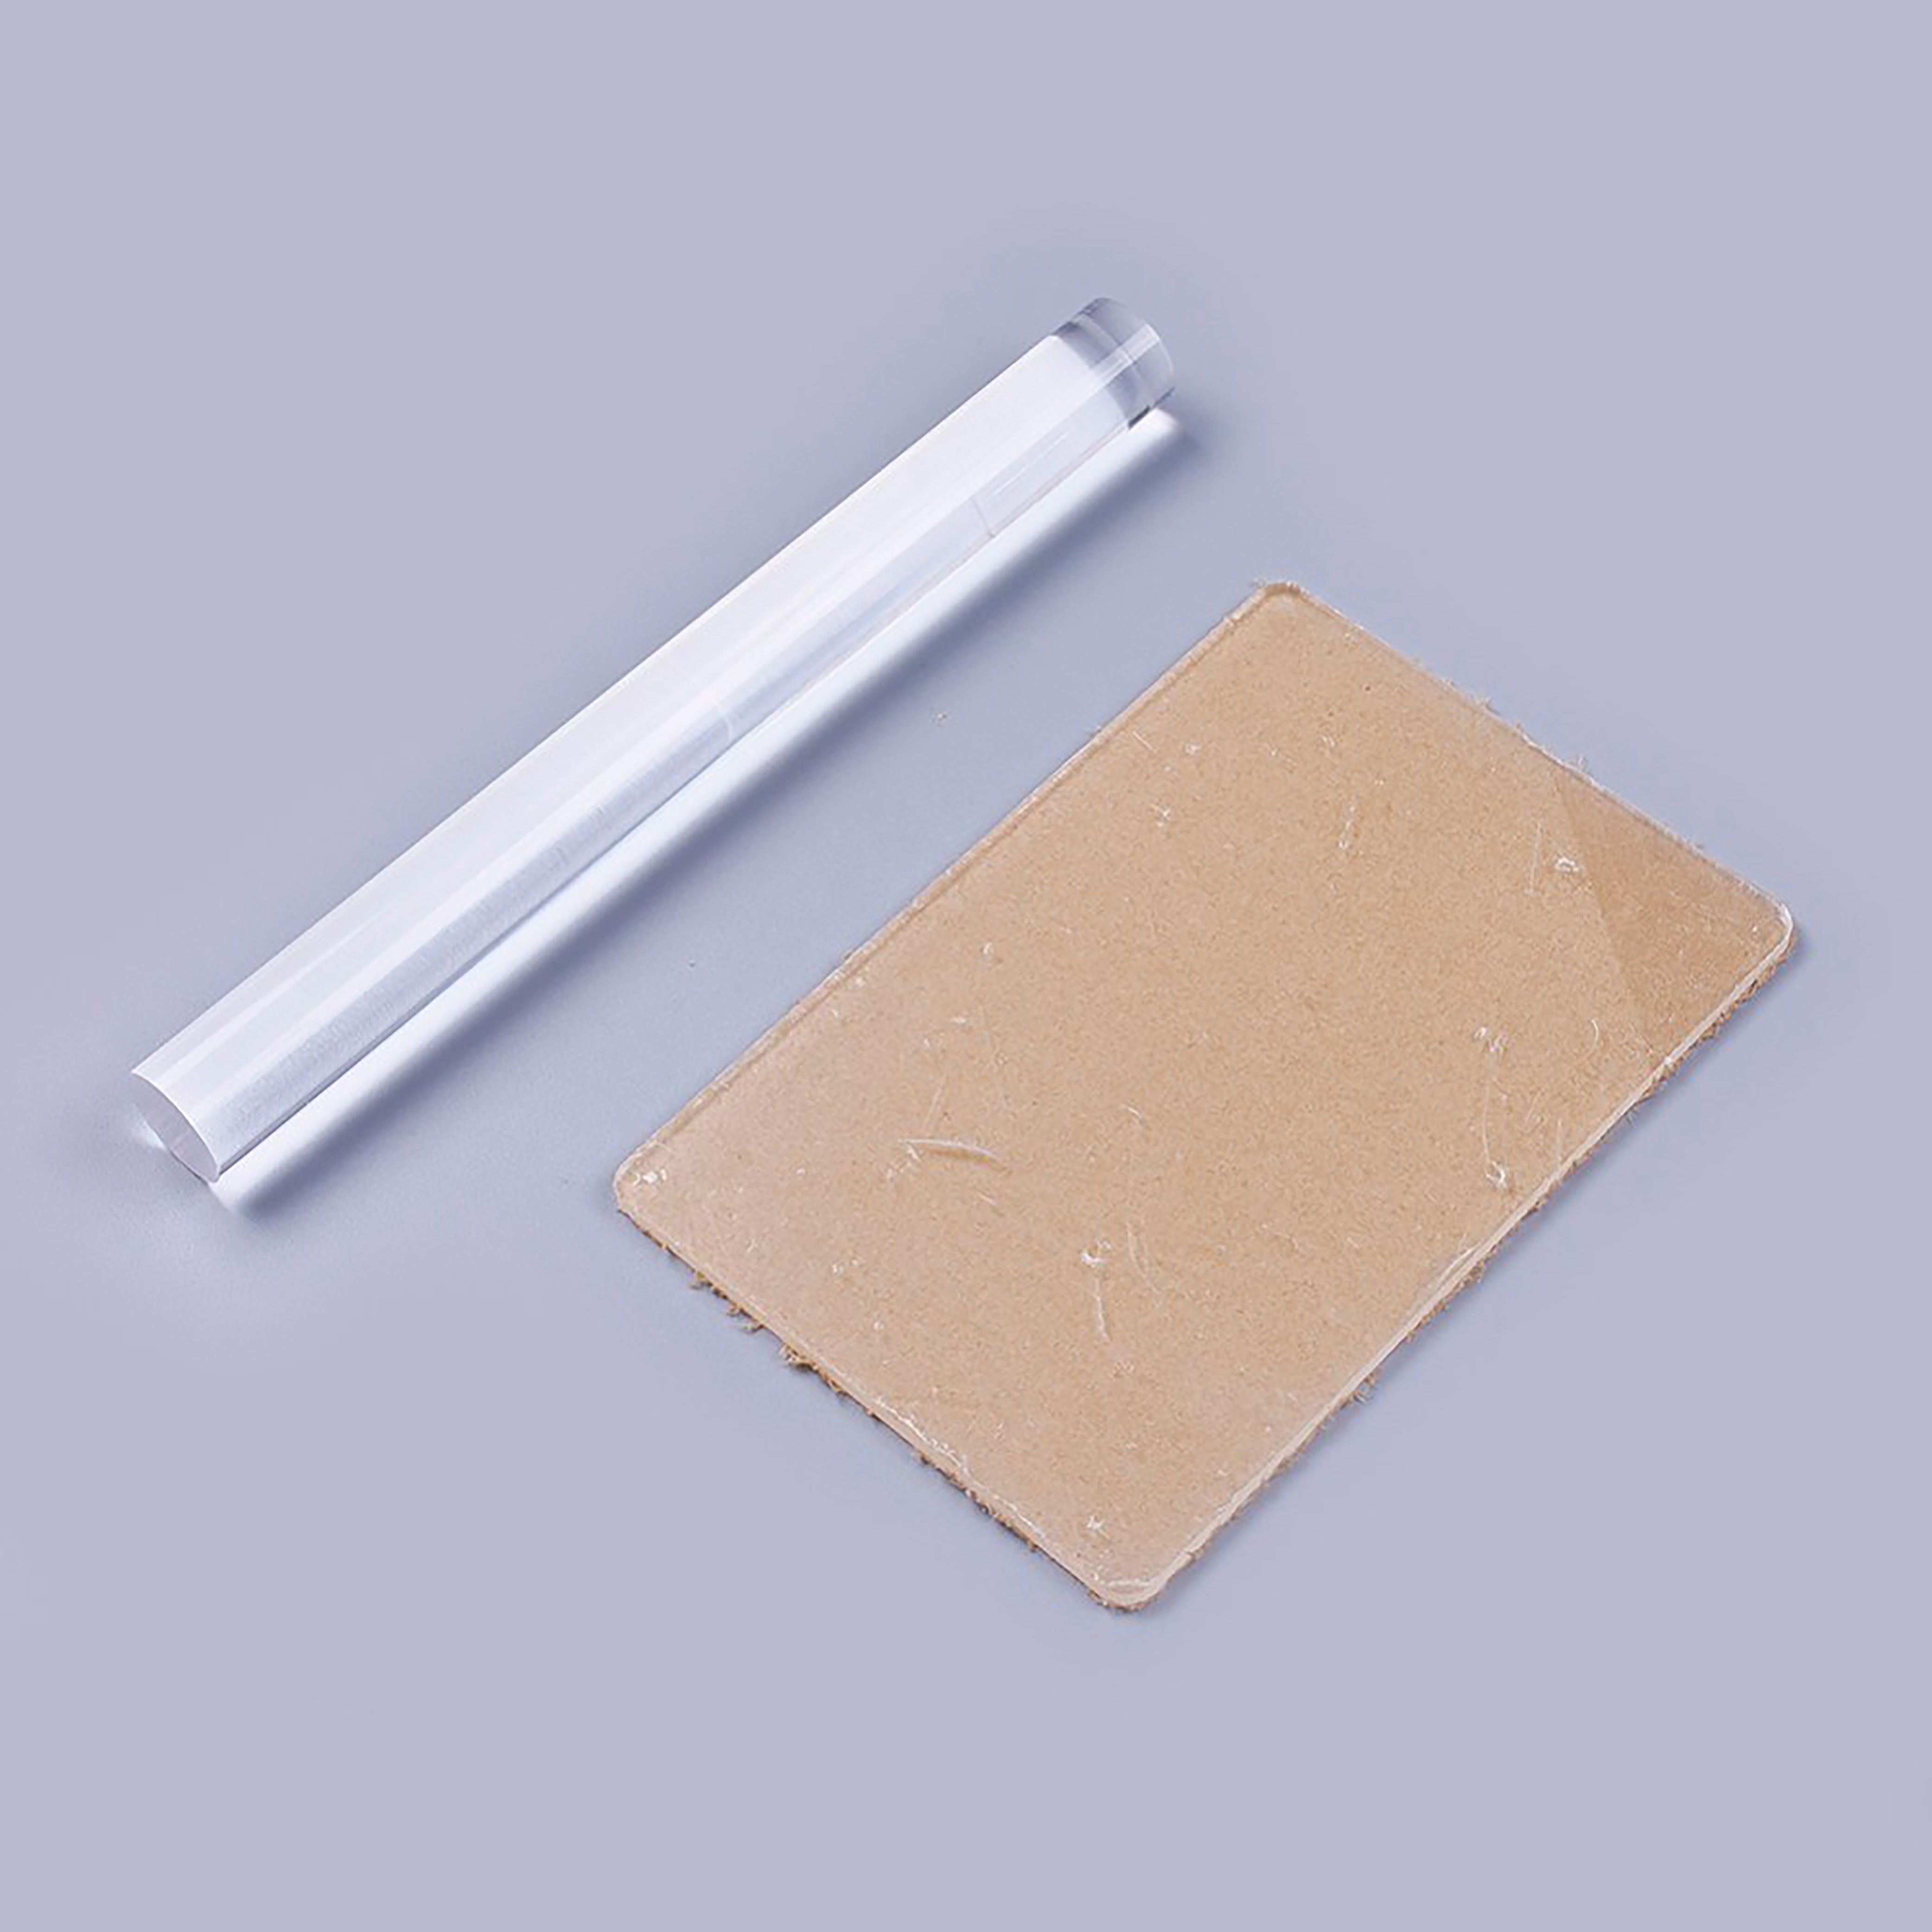 Acrylic Clay Roller and Pressure Plate Set, 20x2cm